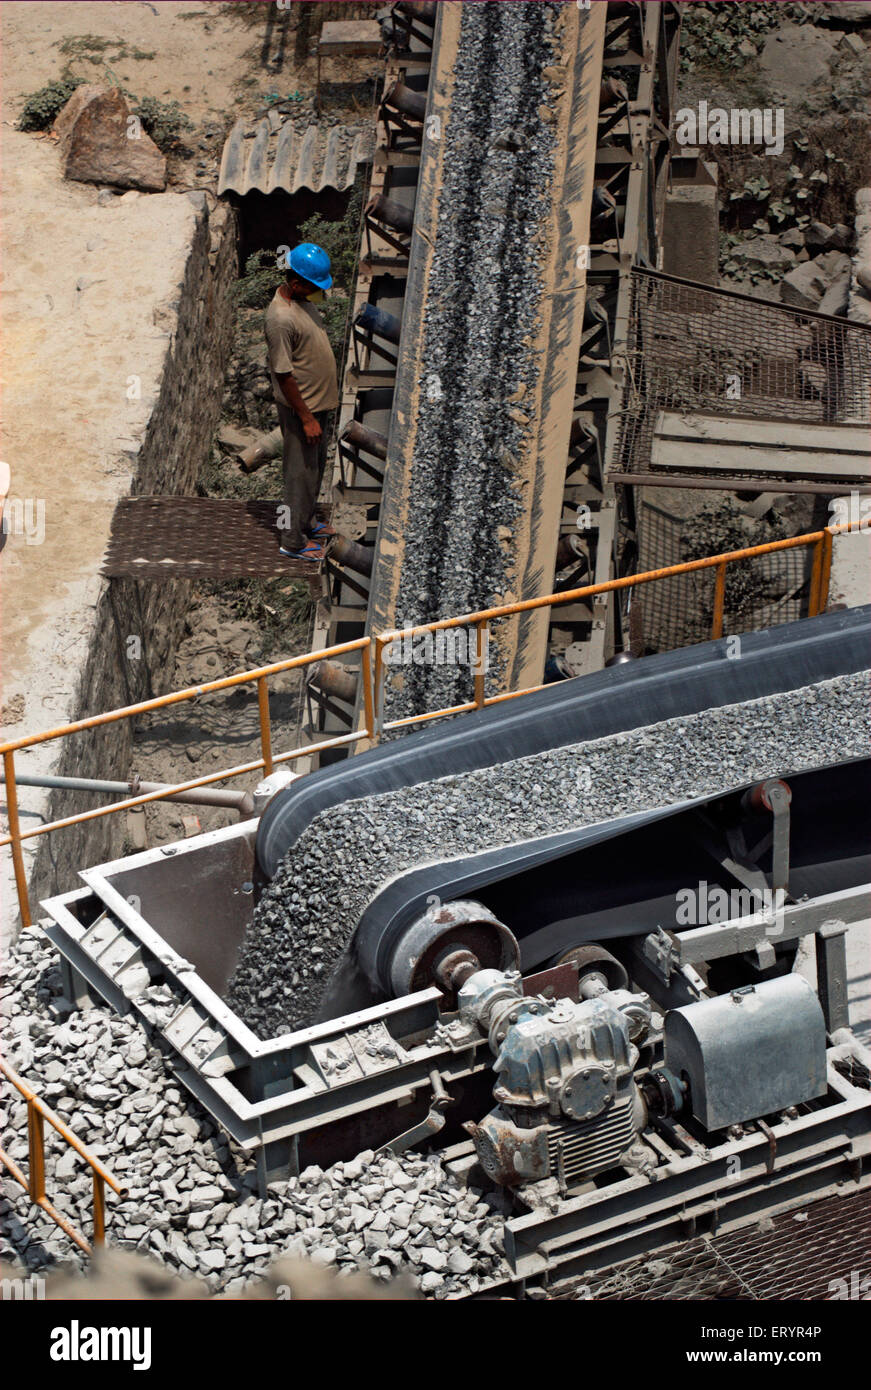 Worker inspecting crushed stones on conveyor belt on bypass site ; Madras Chennai ; Tamil Nadu ; India 17 July 2008 Stock Photo